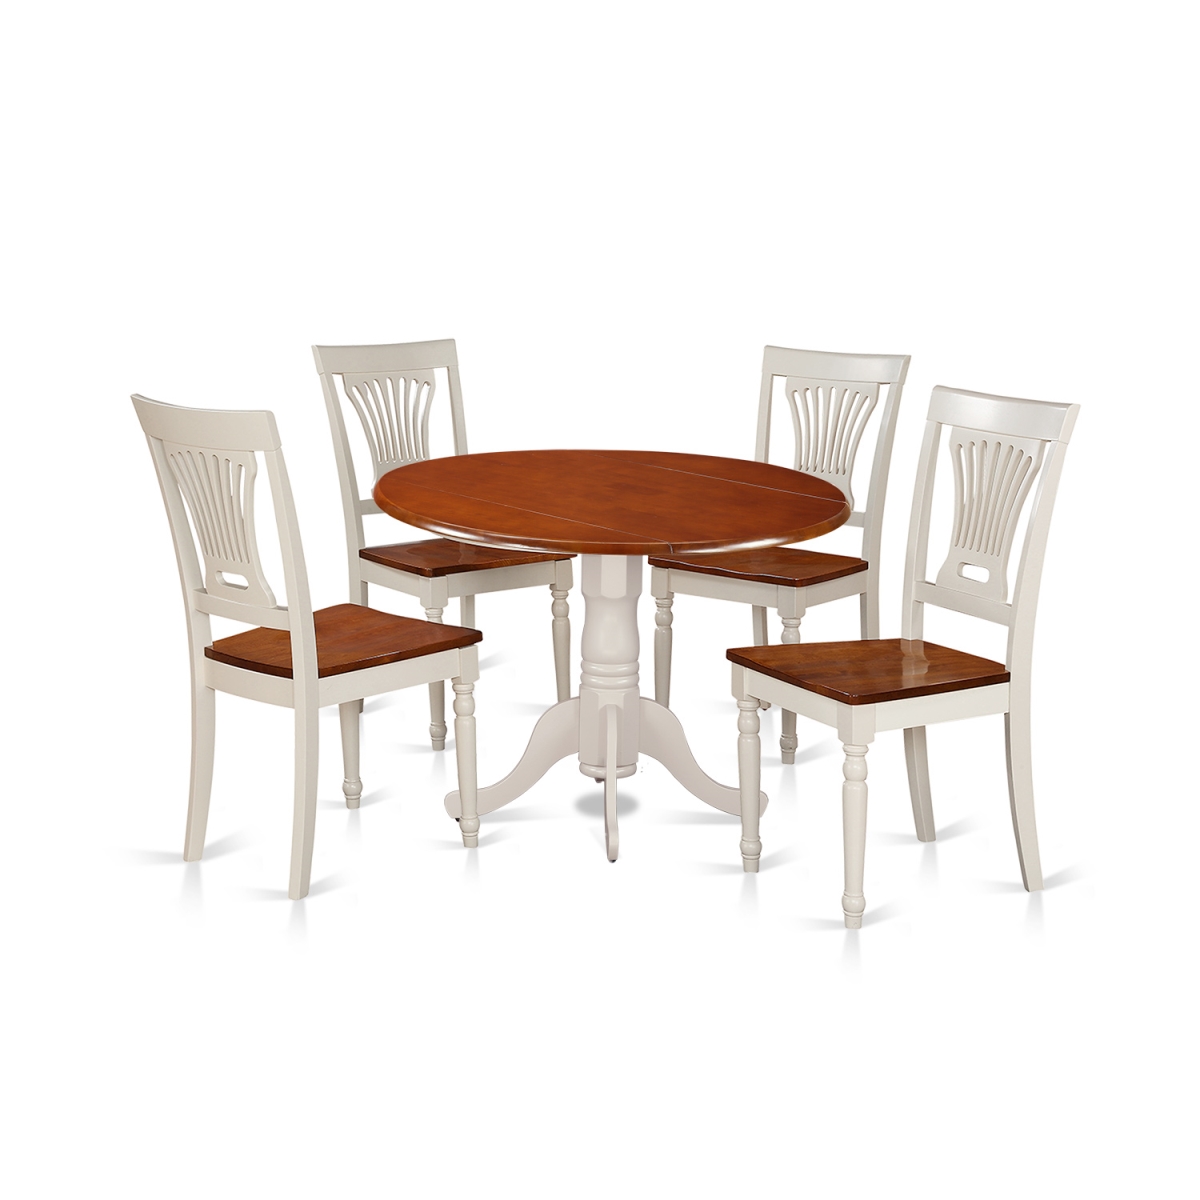 Picture of East West Furniture DLPL5-BMK-W Small Dining Set - Table & 4 Chairs, Buttermilk & Cherry - 5 Piece